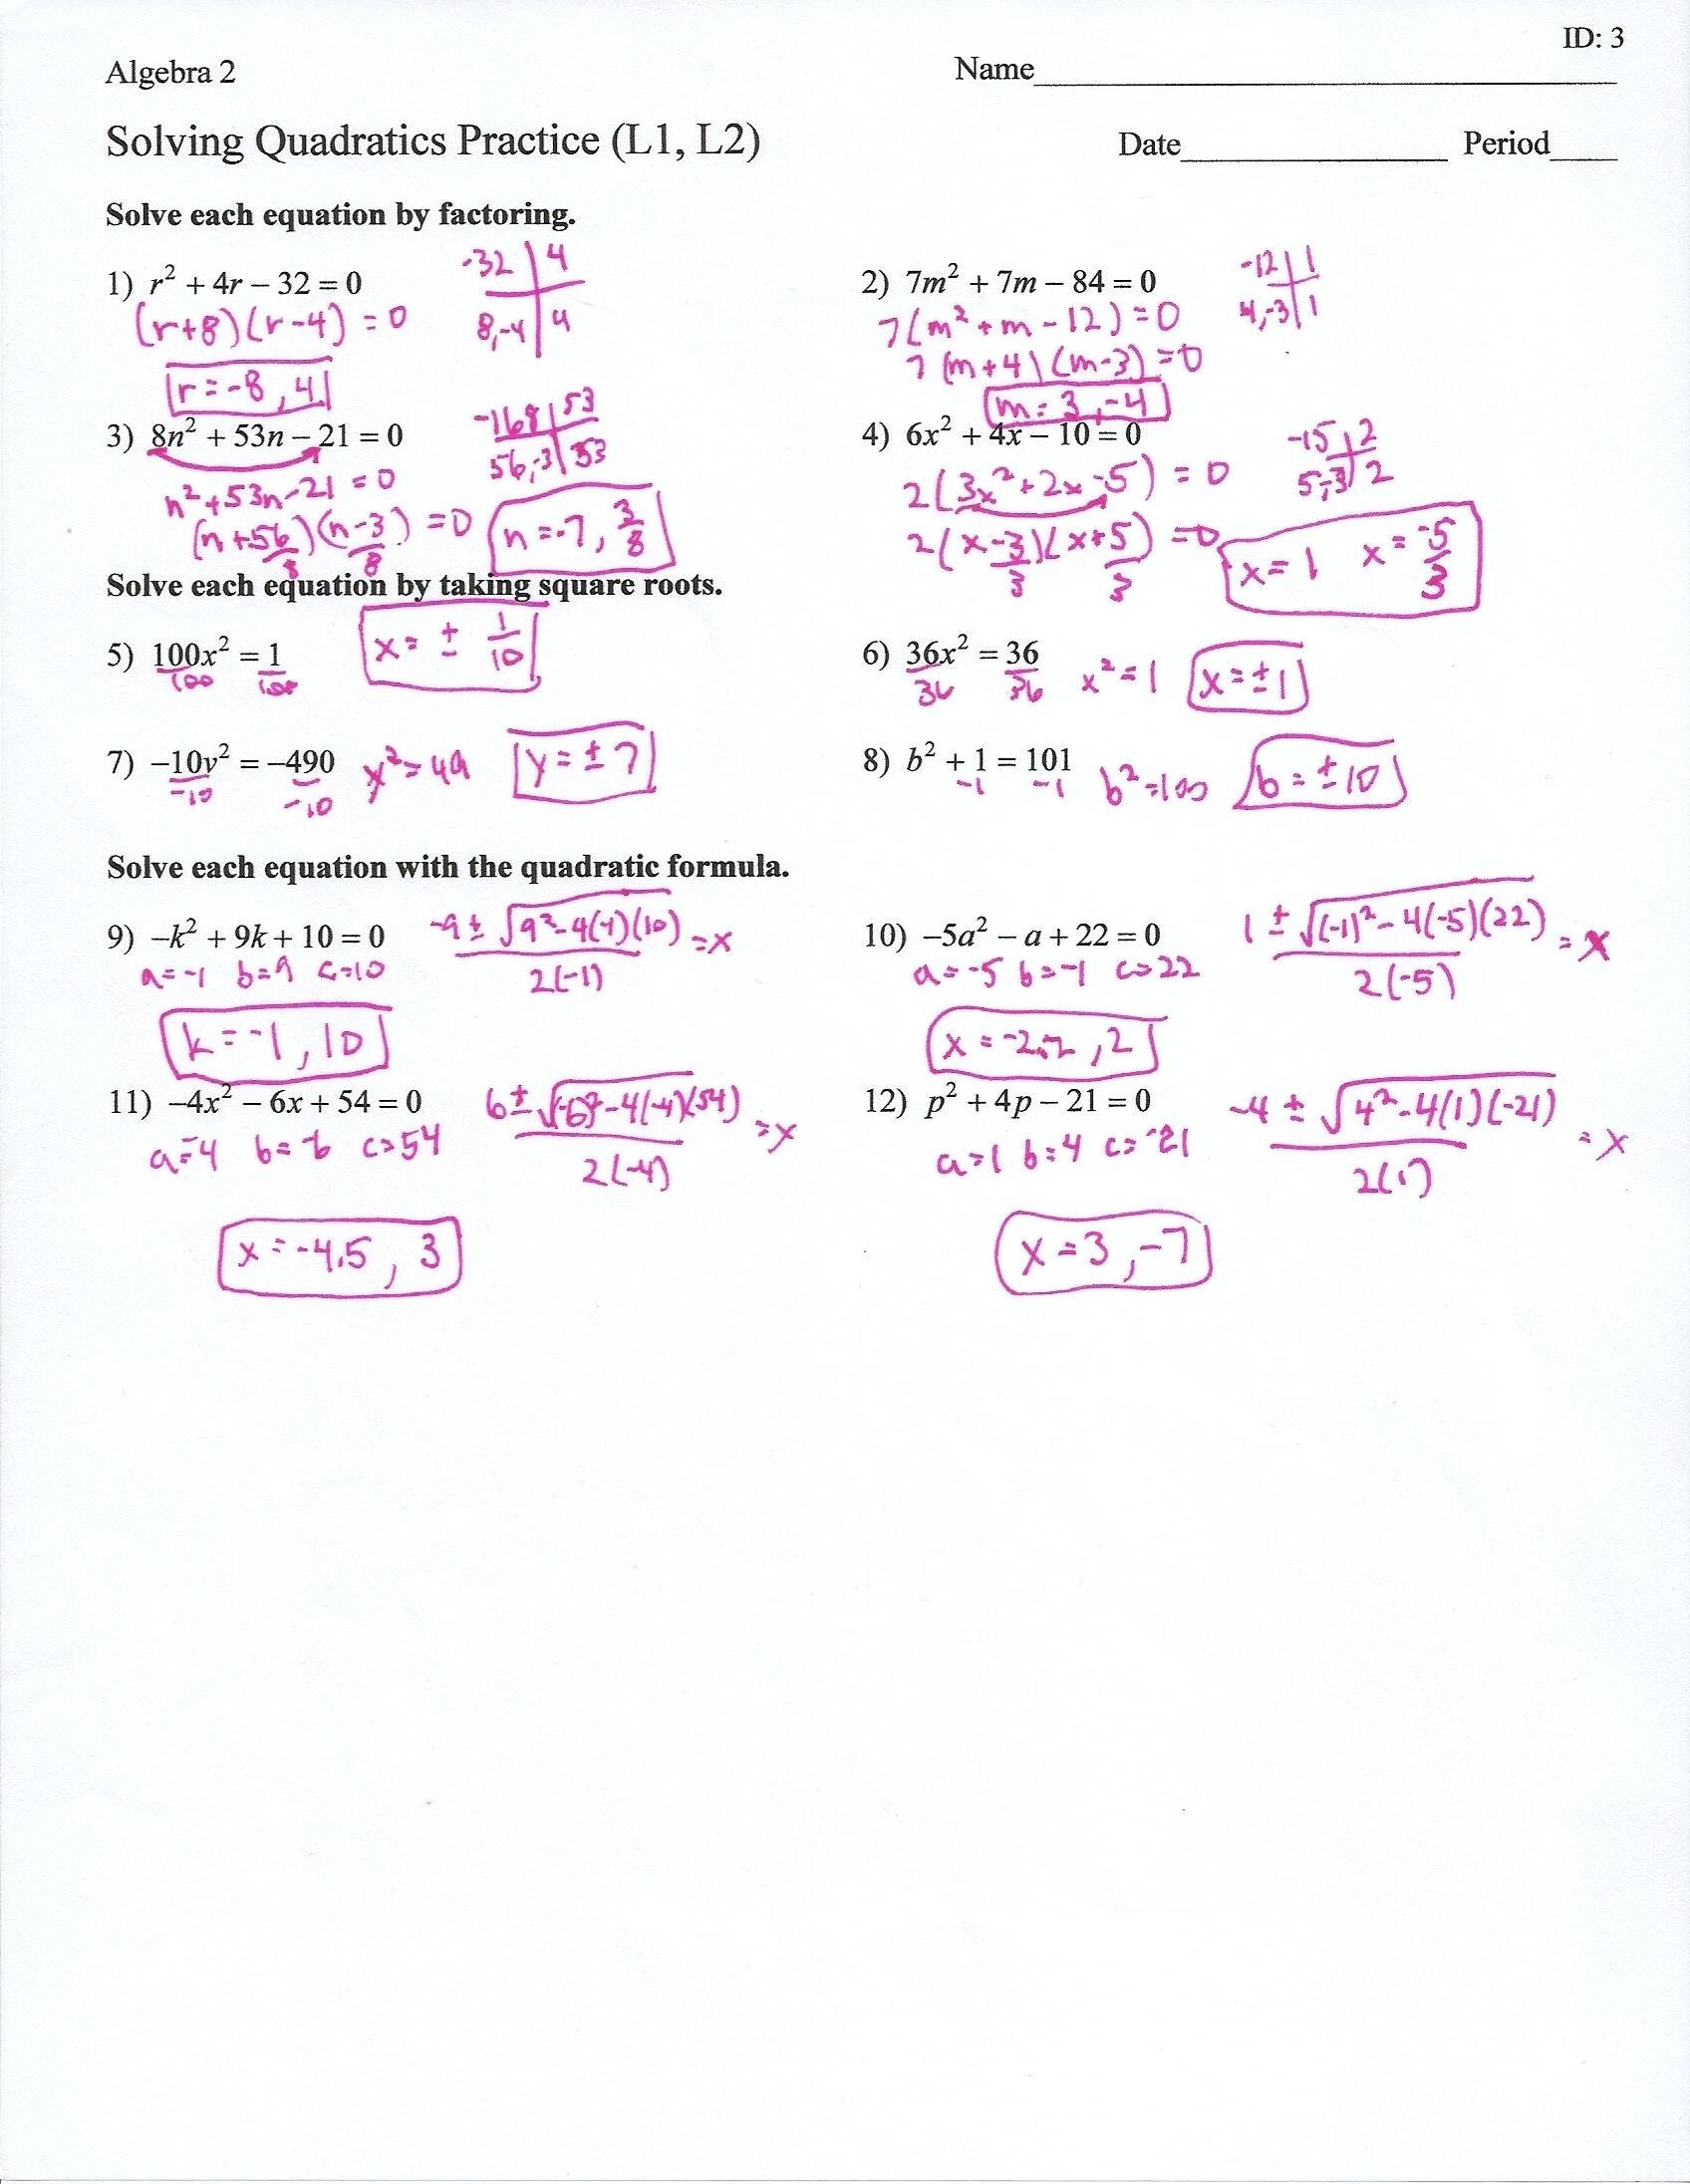 solving quadratic equations by factoring answer key